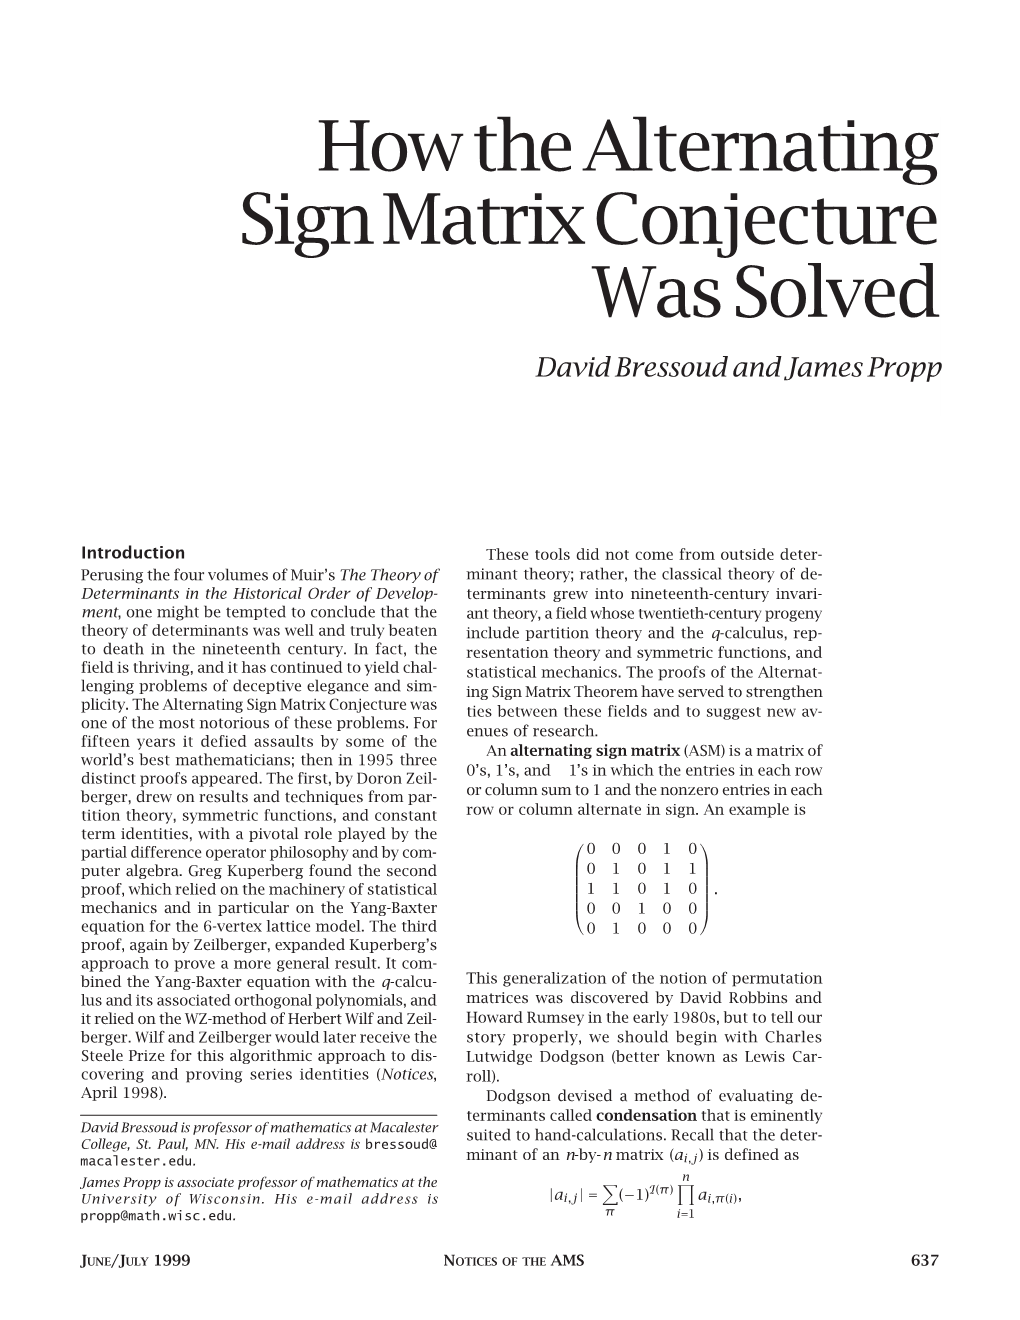 How the Alternating Sign Matrix Conjecture Was Solved, Volume 46